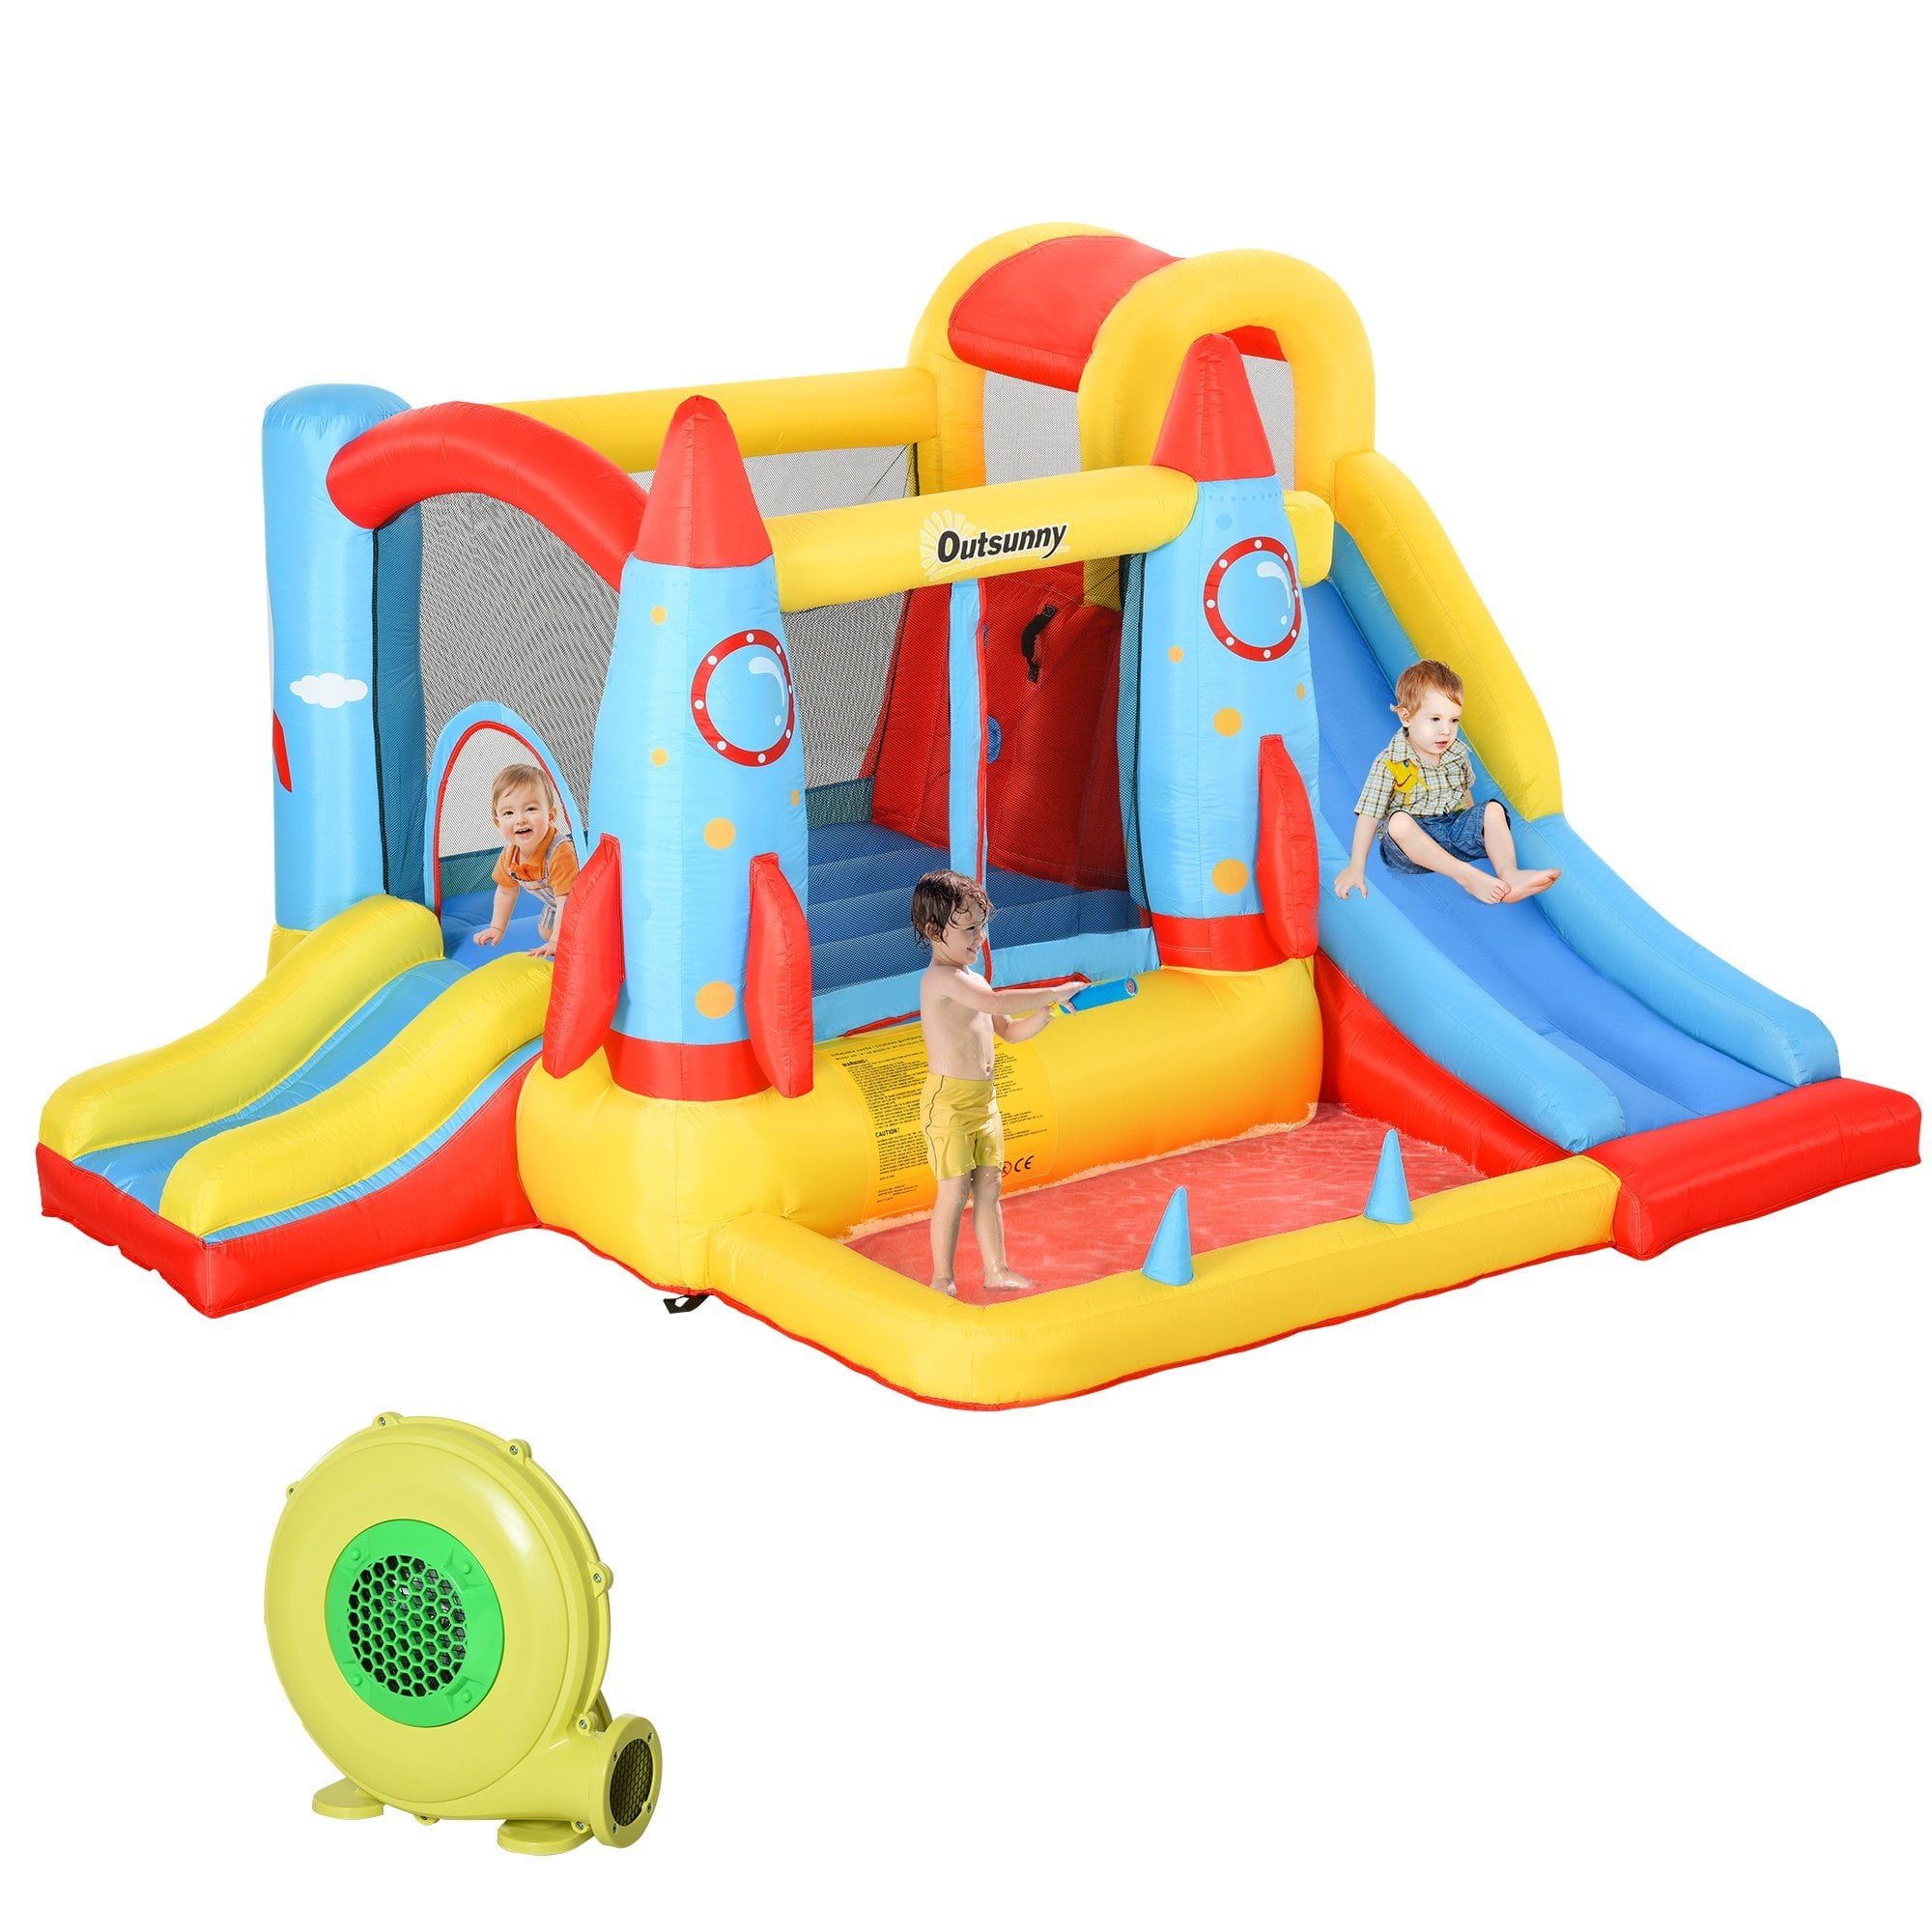 Outsunny Kids Bounce Castle House - 3 in 1 Water Slide and Pool with Inflator - Rocket Design with Carrybag  | TJ Hughes